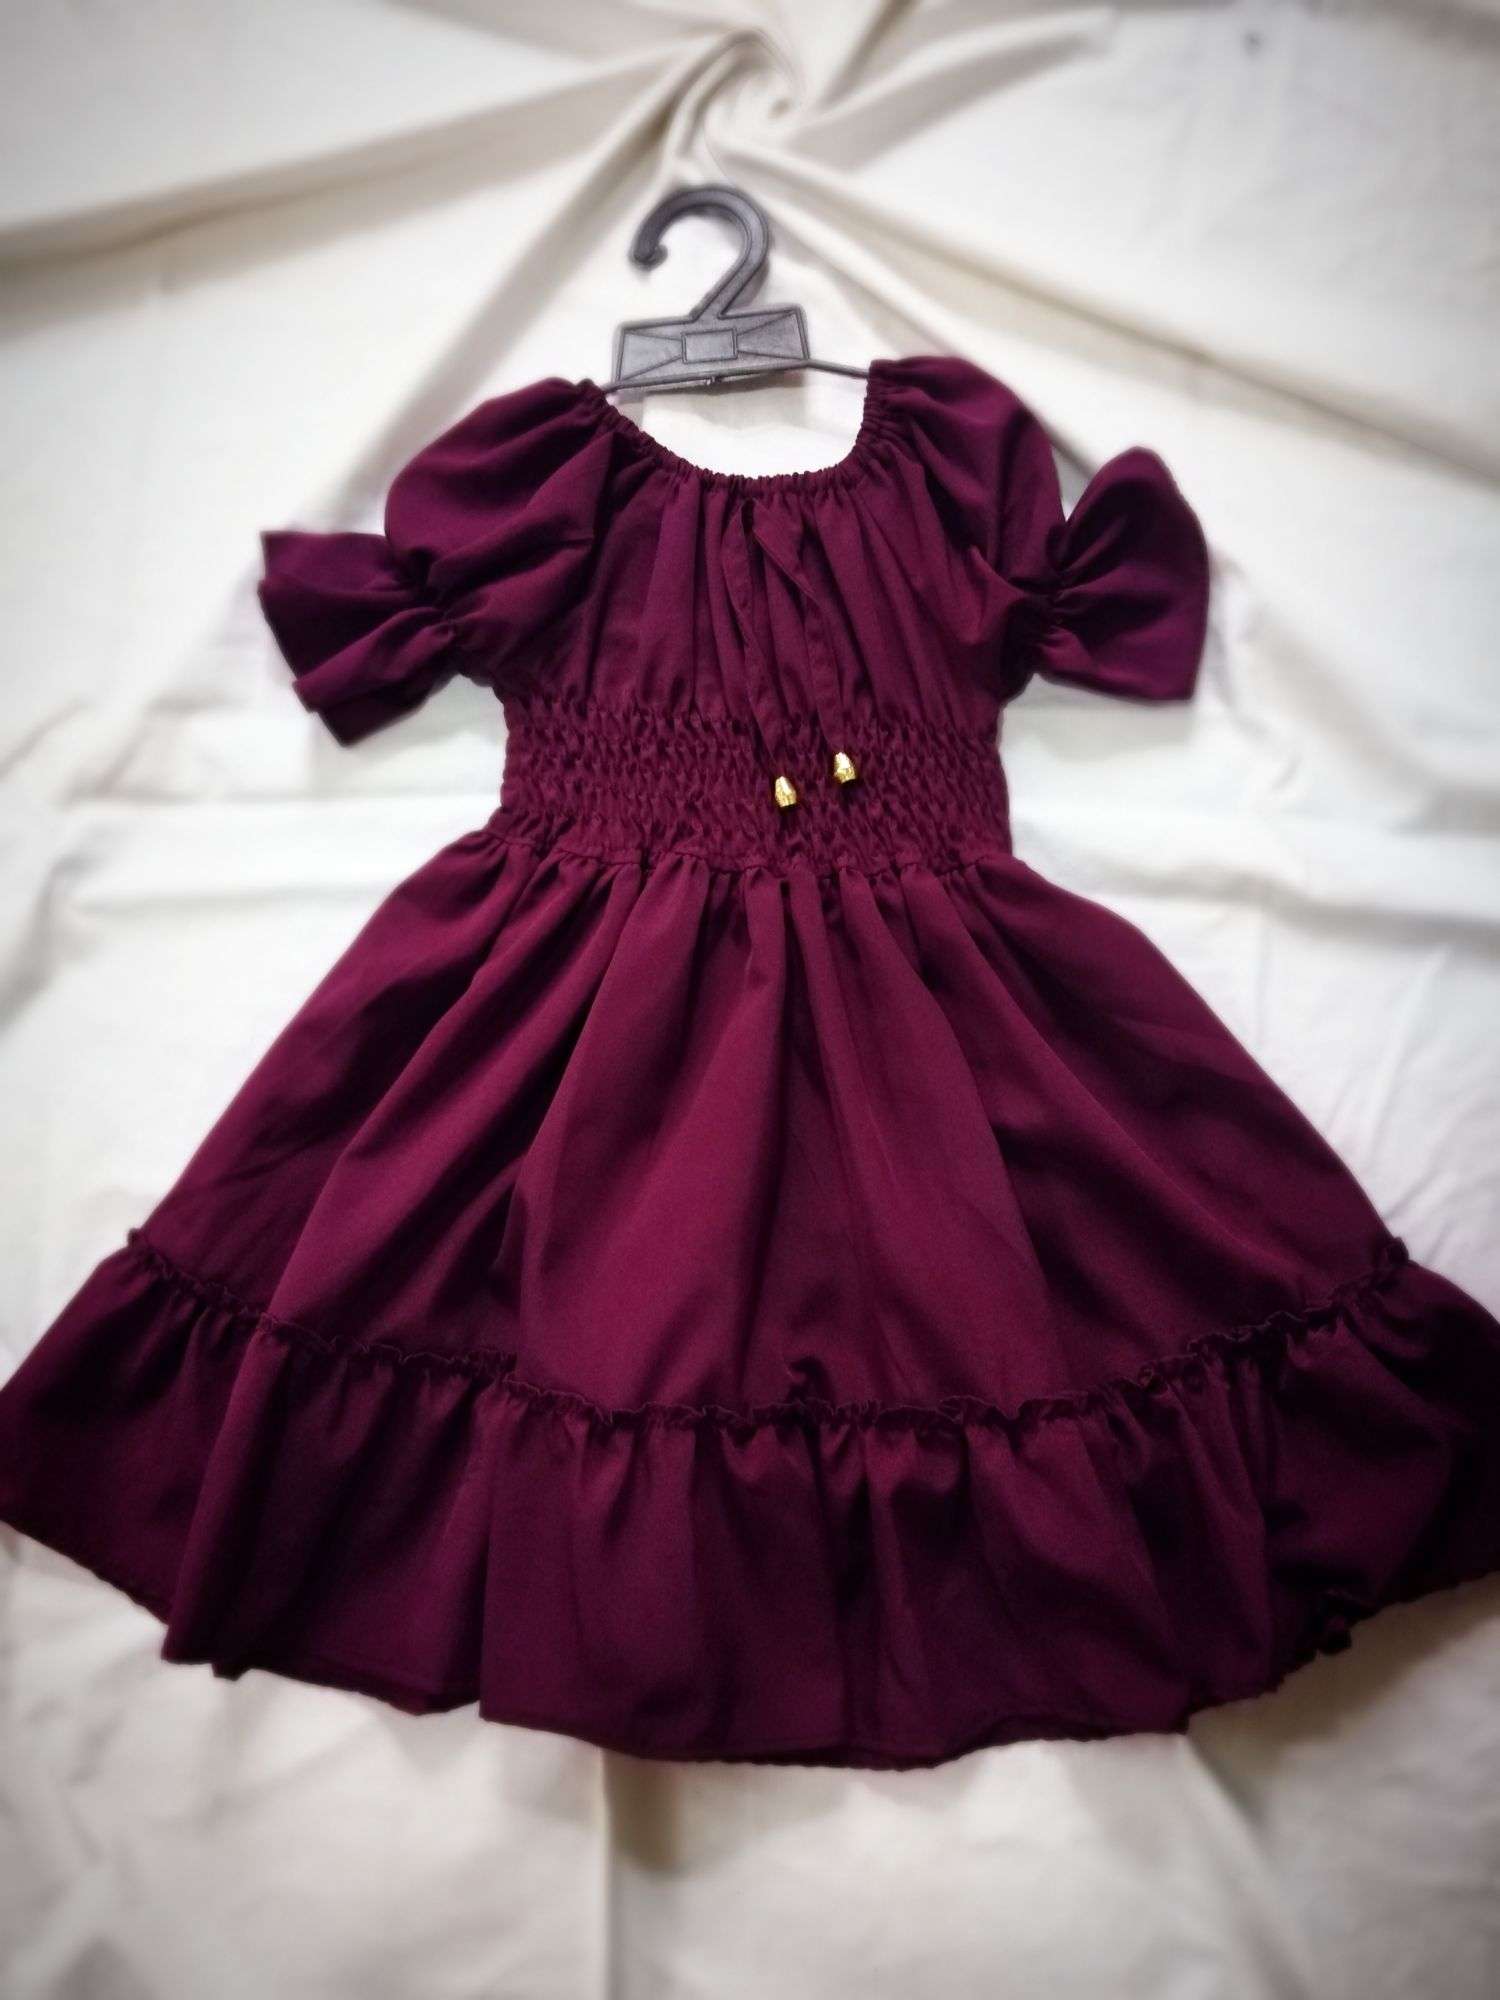 New Fashion Princess Baby Dress For 1st Birthday Cute Newborn Romper For Infant  Clothing And Toddler Toddler Dresses From Child8866, $15.38 | DHgate.Com